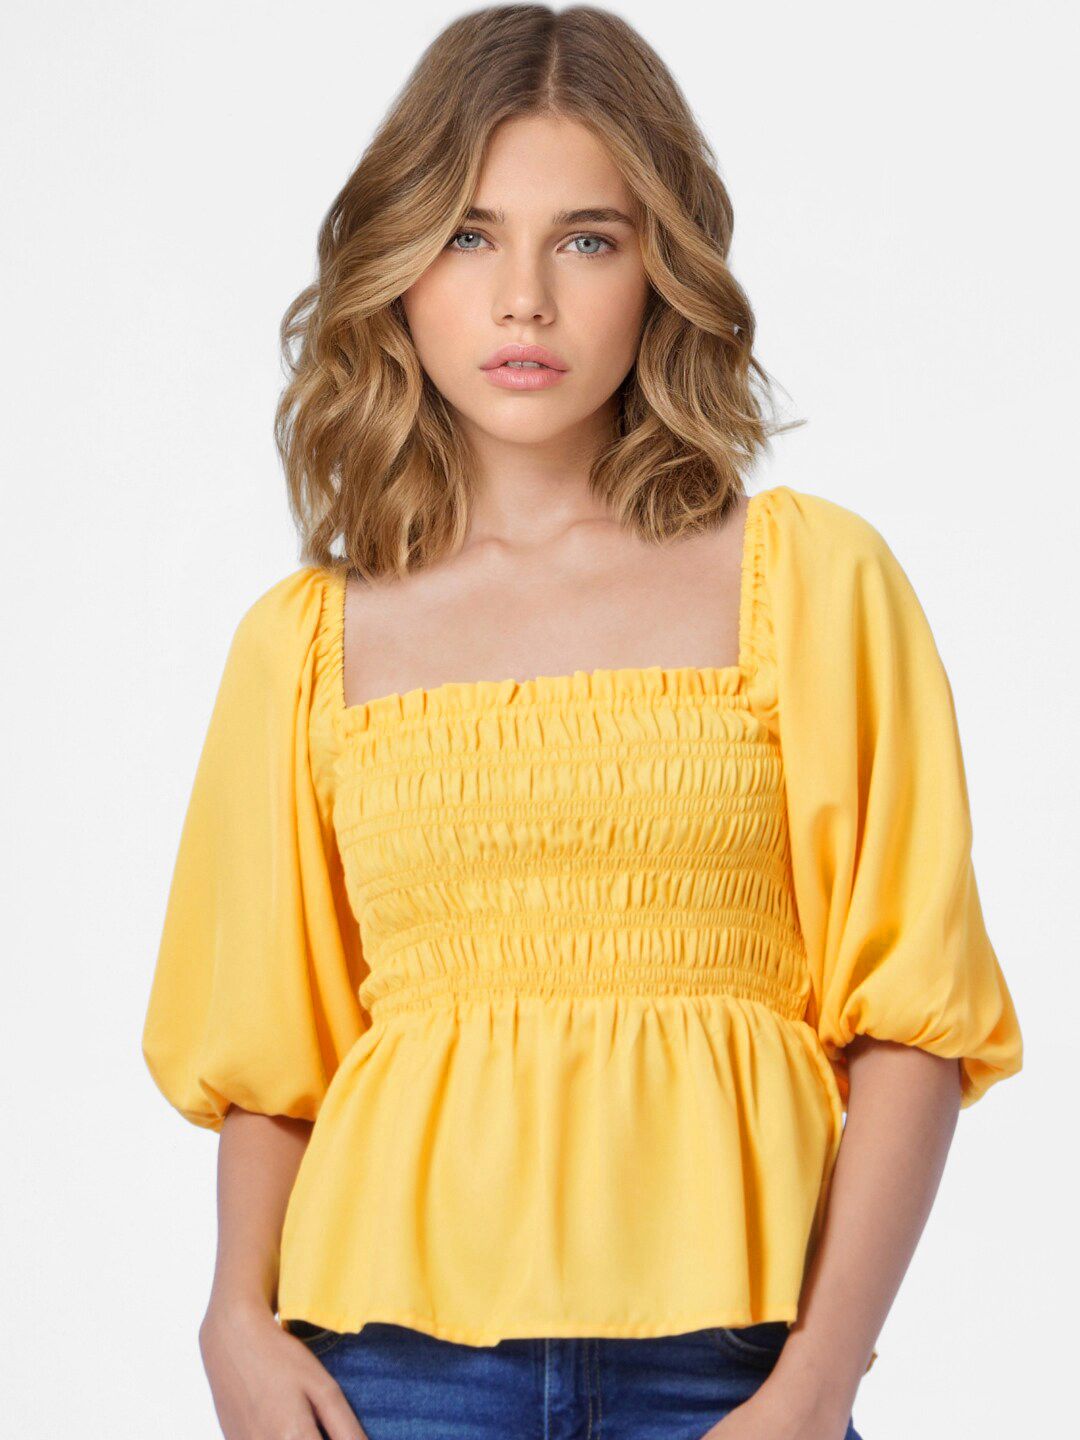 ONLY Women Yellow Smocked Top Price in India